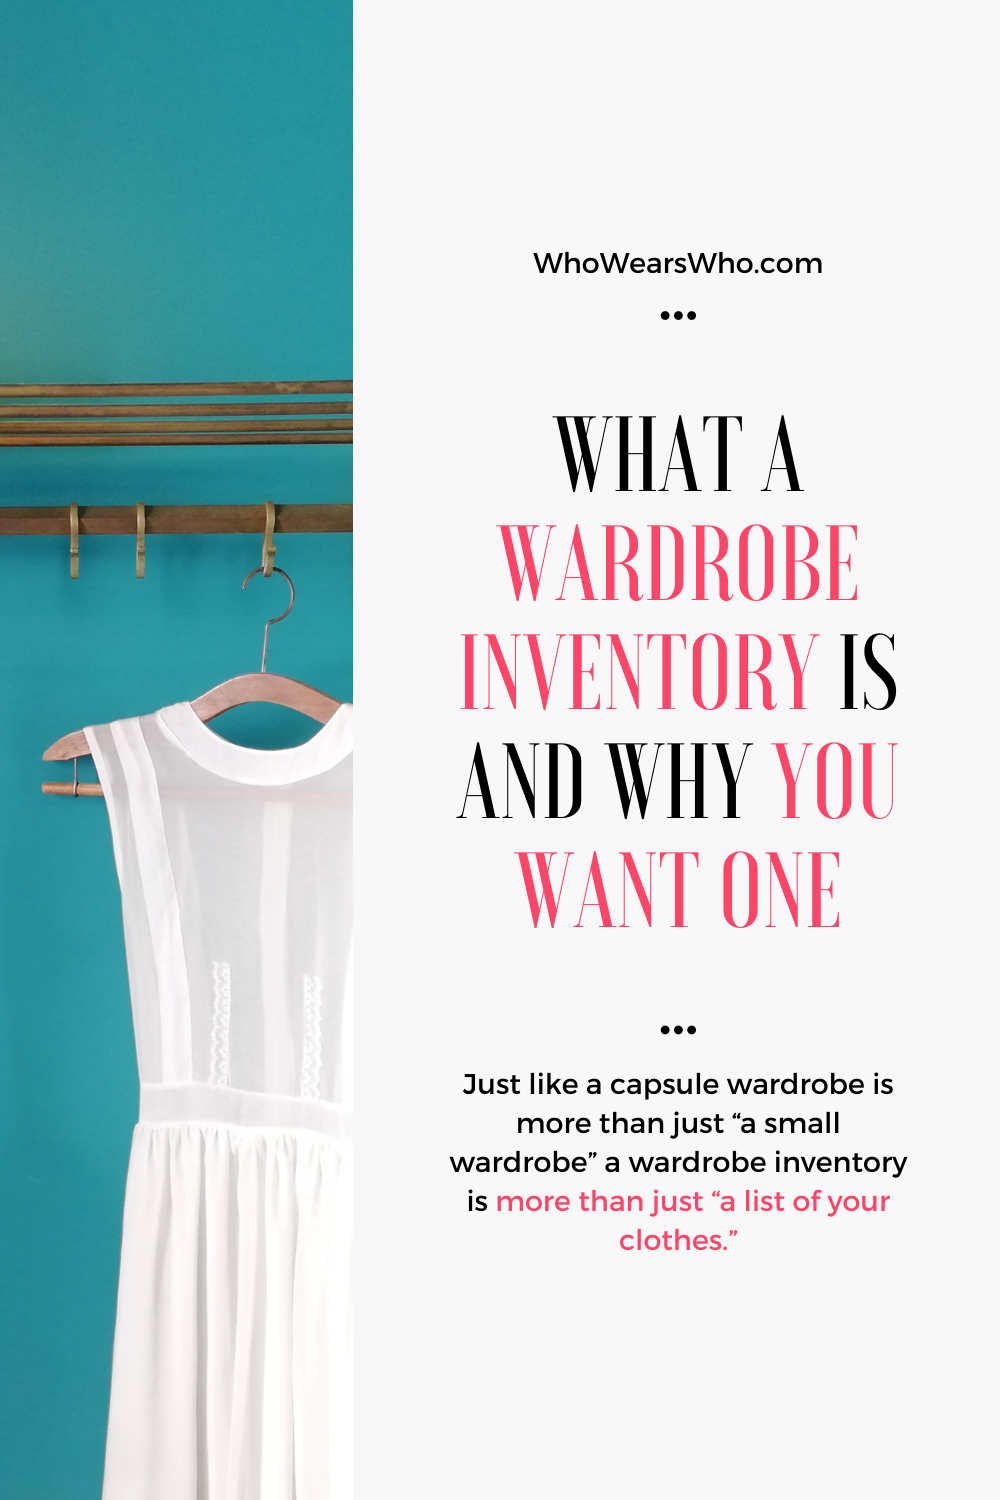 What a wardrobe inventory is and why you want one